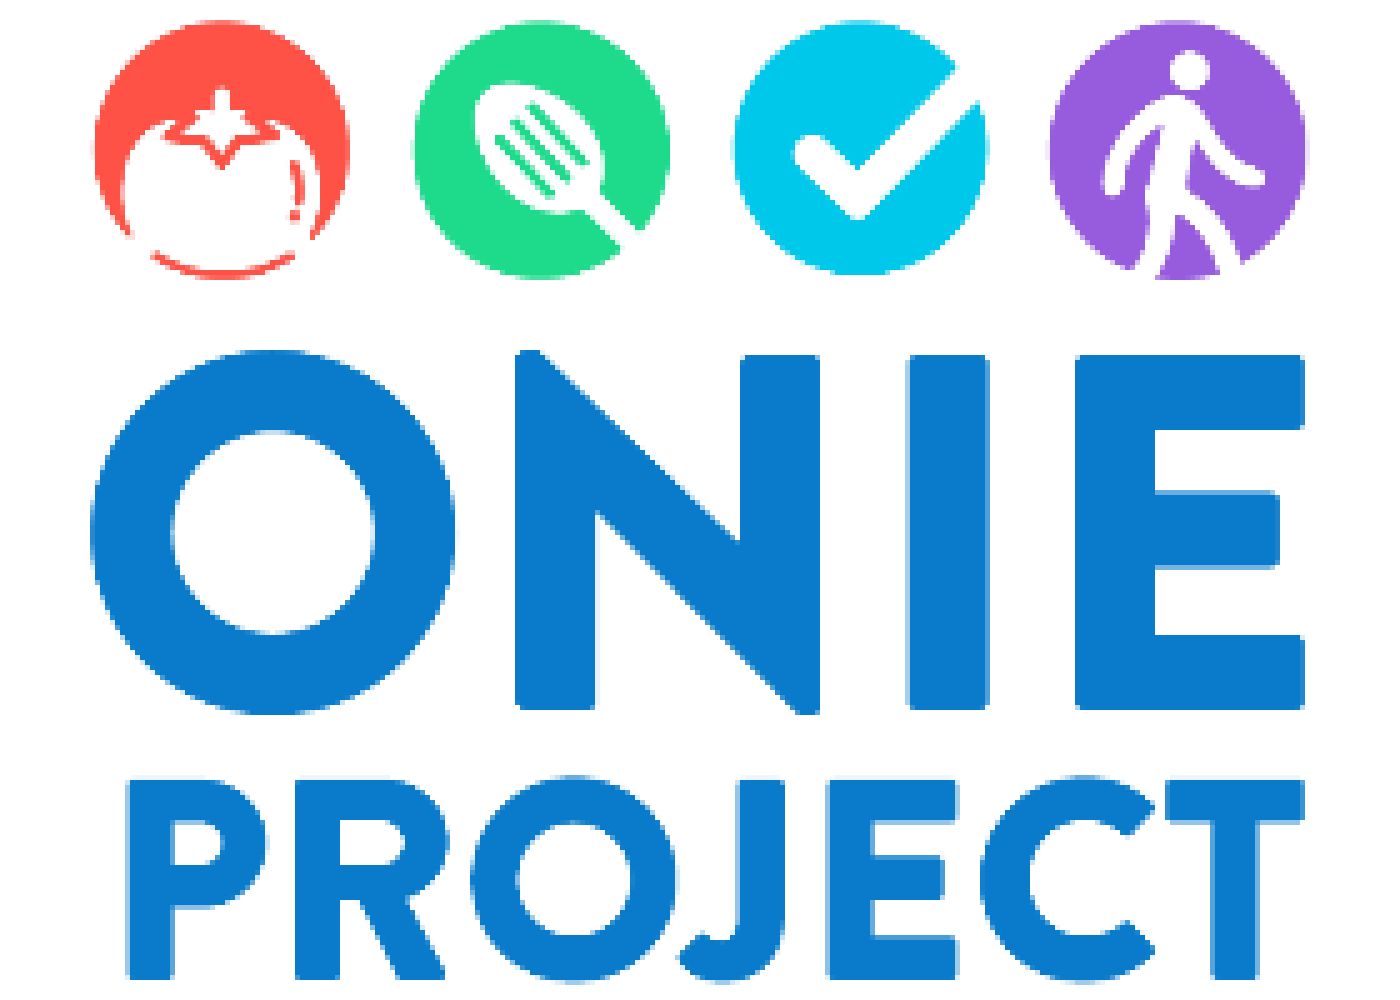 ONIE Project with drawings of a tomato, a cooking utensil, a check mark, and a person walking